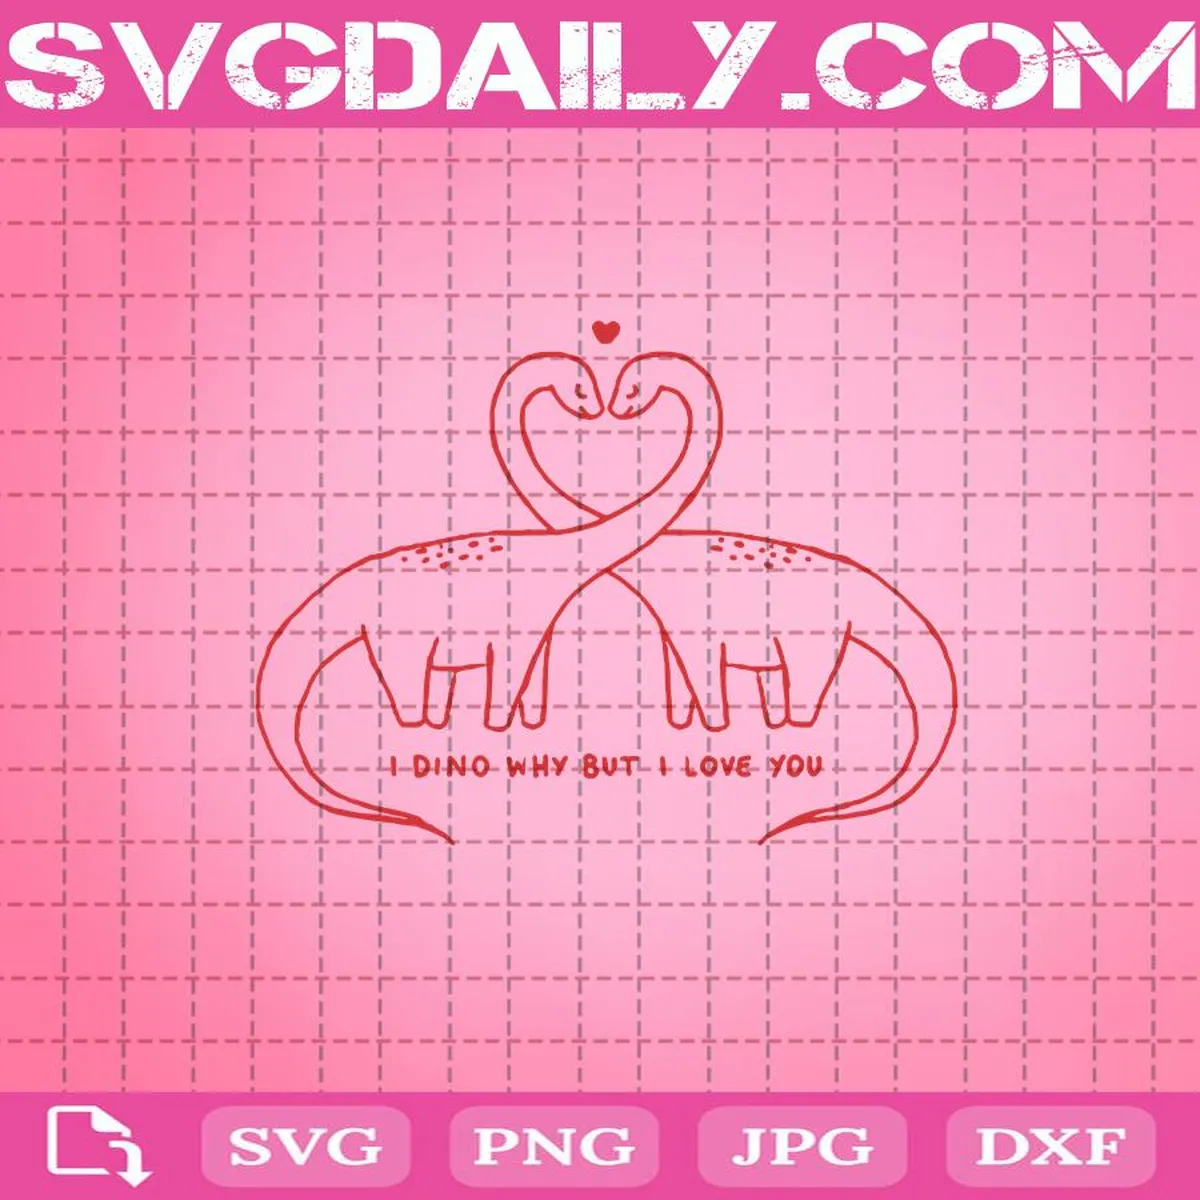 I Dino Why But I Love You Svg, Dinosaurs Svg, Valentines Day Svg, Saurus Svg, Love Card Svg, Love Card Dinosaur Svg, Dinosaur Valentine Svg